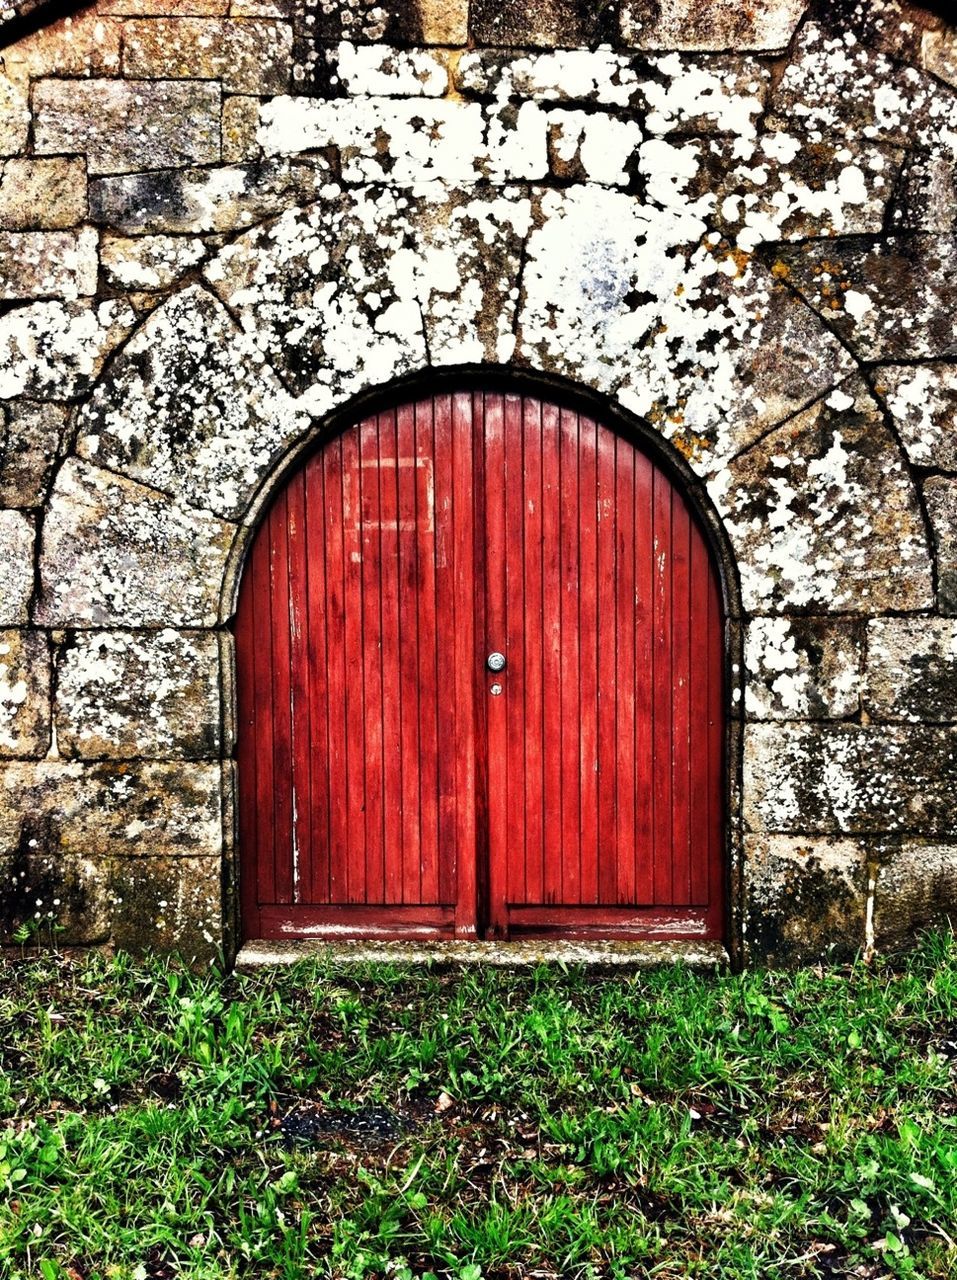 red, built structure, building exterior, architecture, closed, door, house, grass, safety, protection, wood - material, window, entrance, brick wall, day, outdoors, no people, old, security, wood